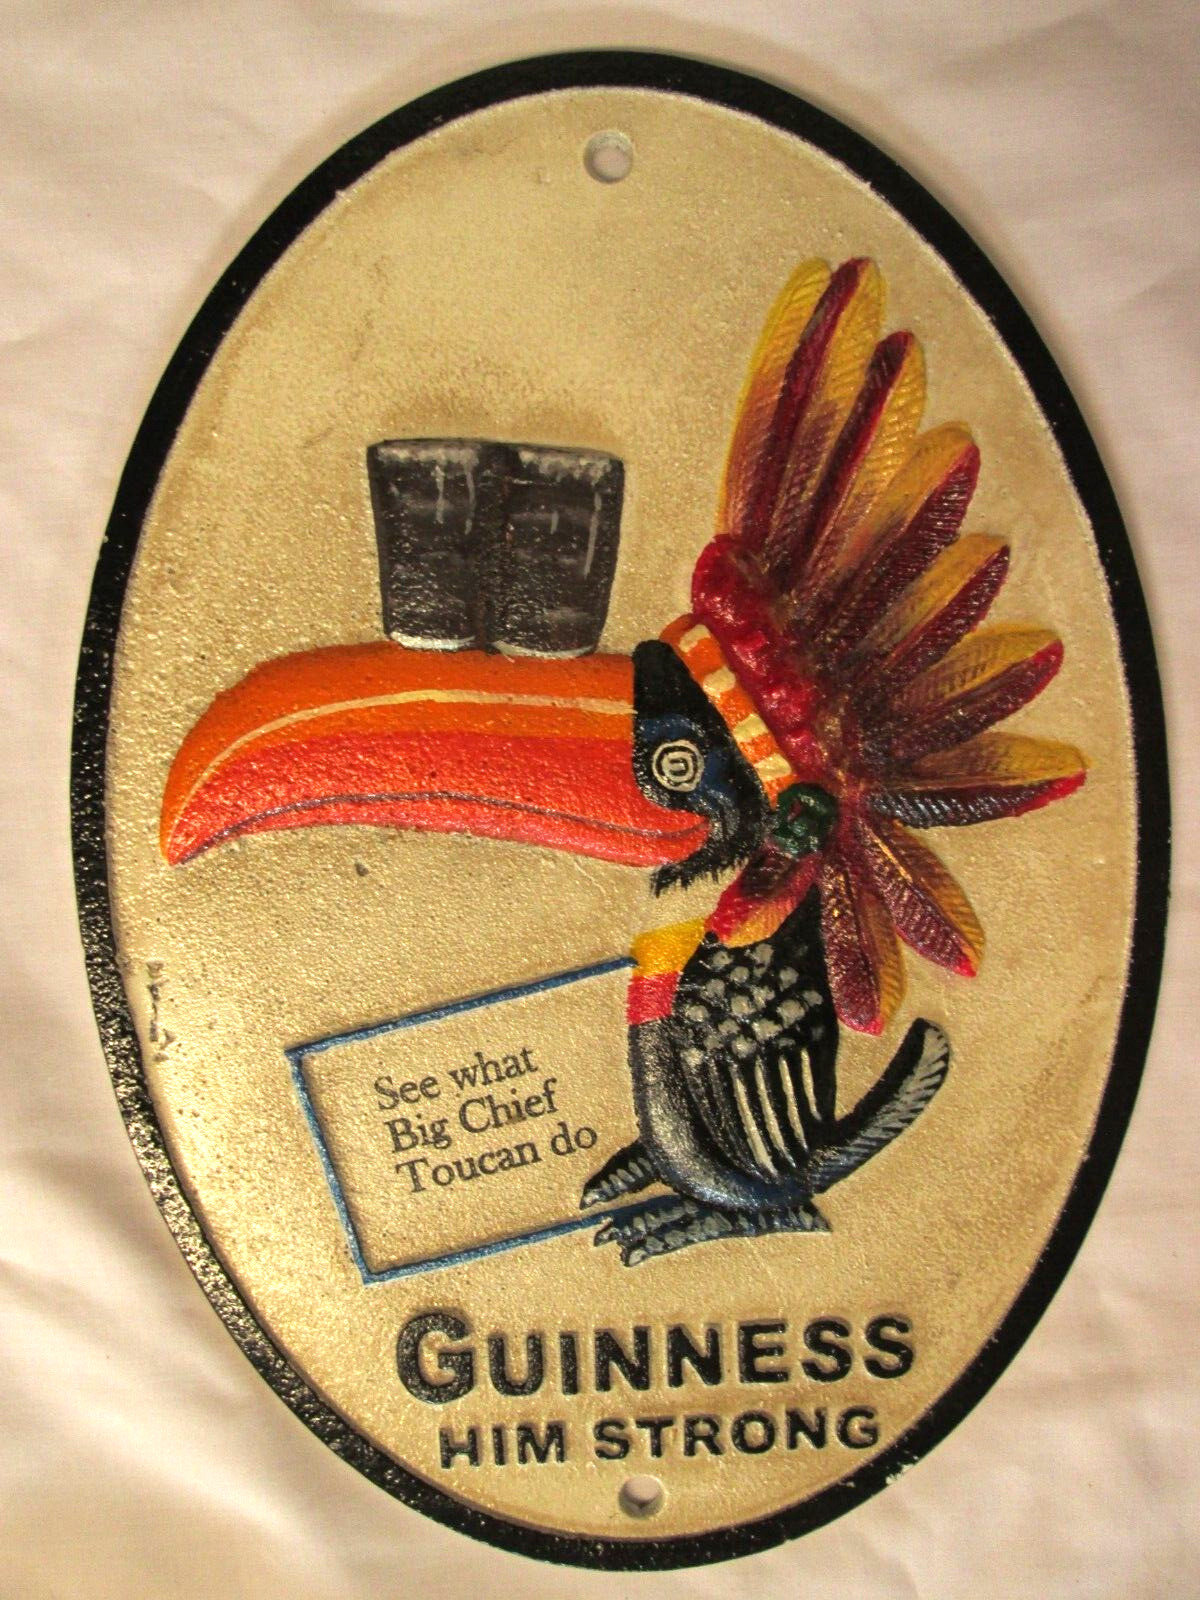 GUINNESS ~ Him Strong, Big Chief Toucan Do, Cast Iron Oval Beer Sign, 11” x 8”